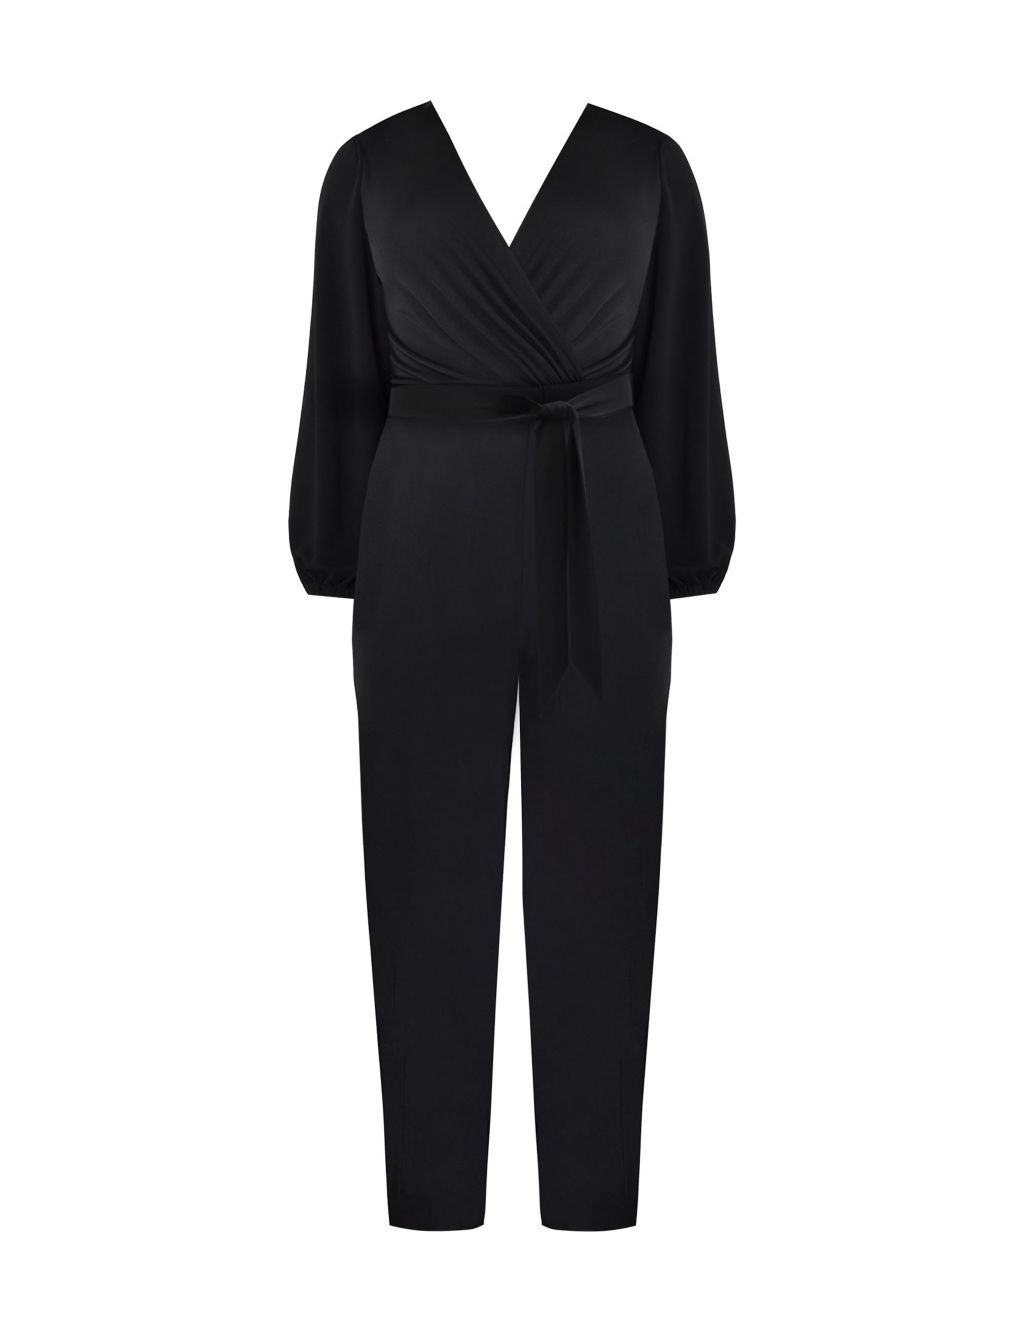 Jersey Belted Long Sleeve Wrap Jumpsuit image 2